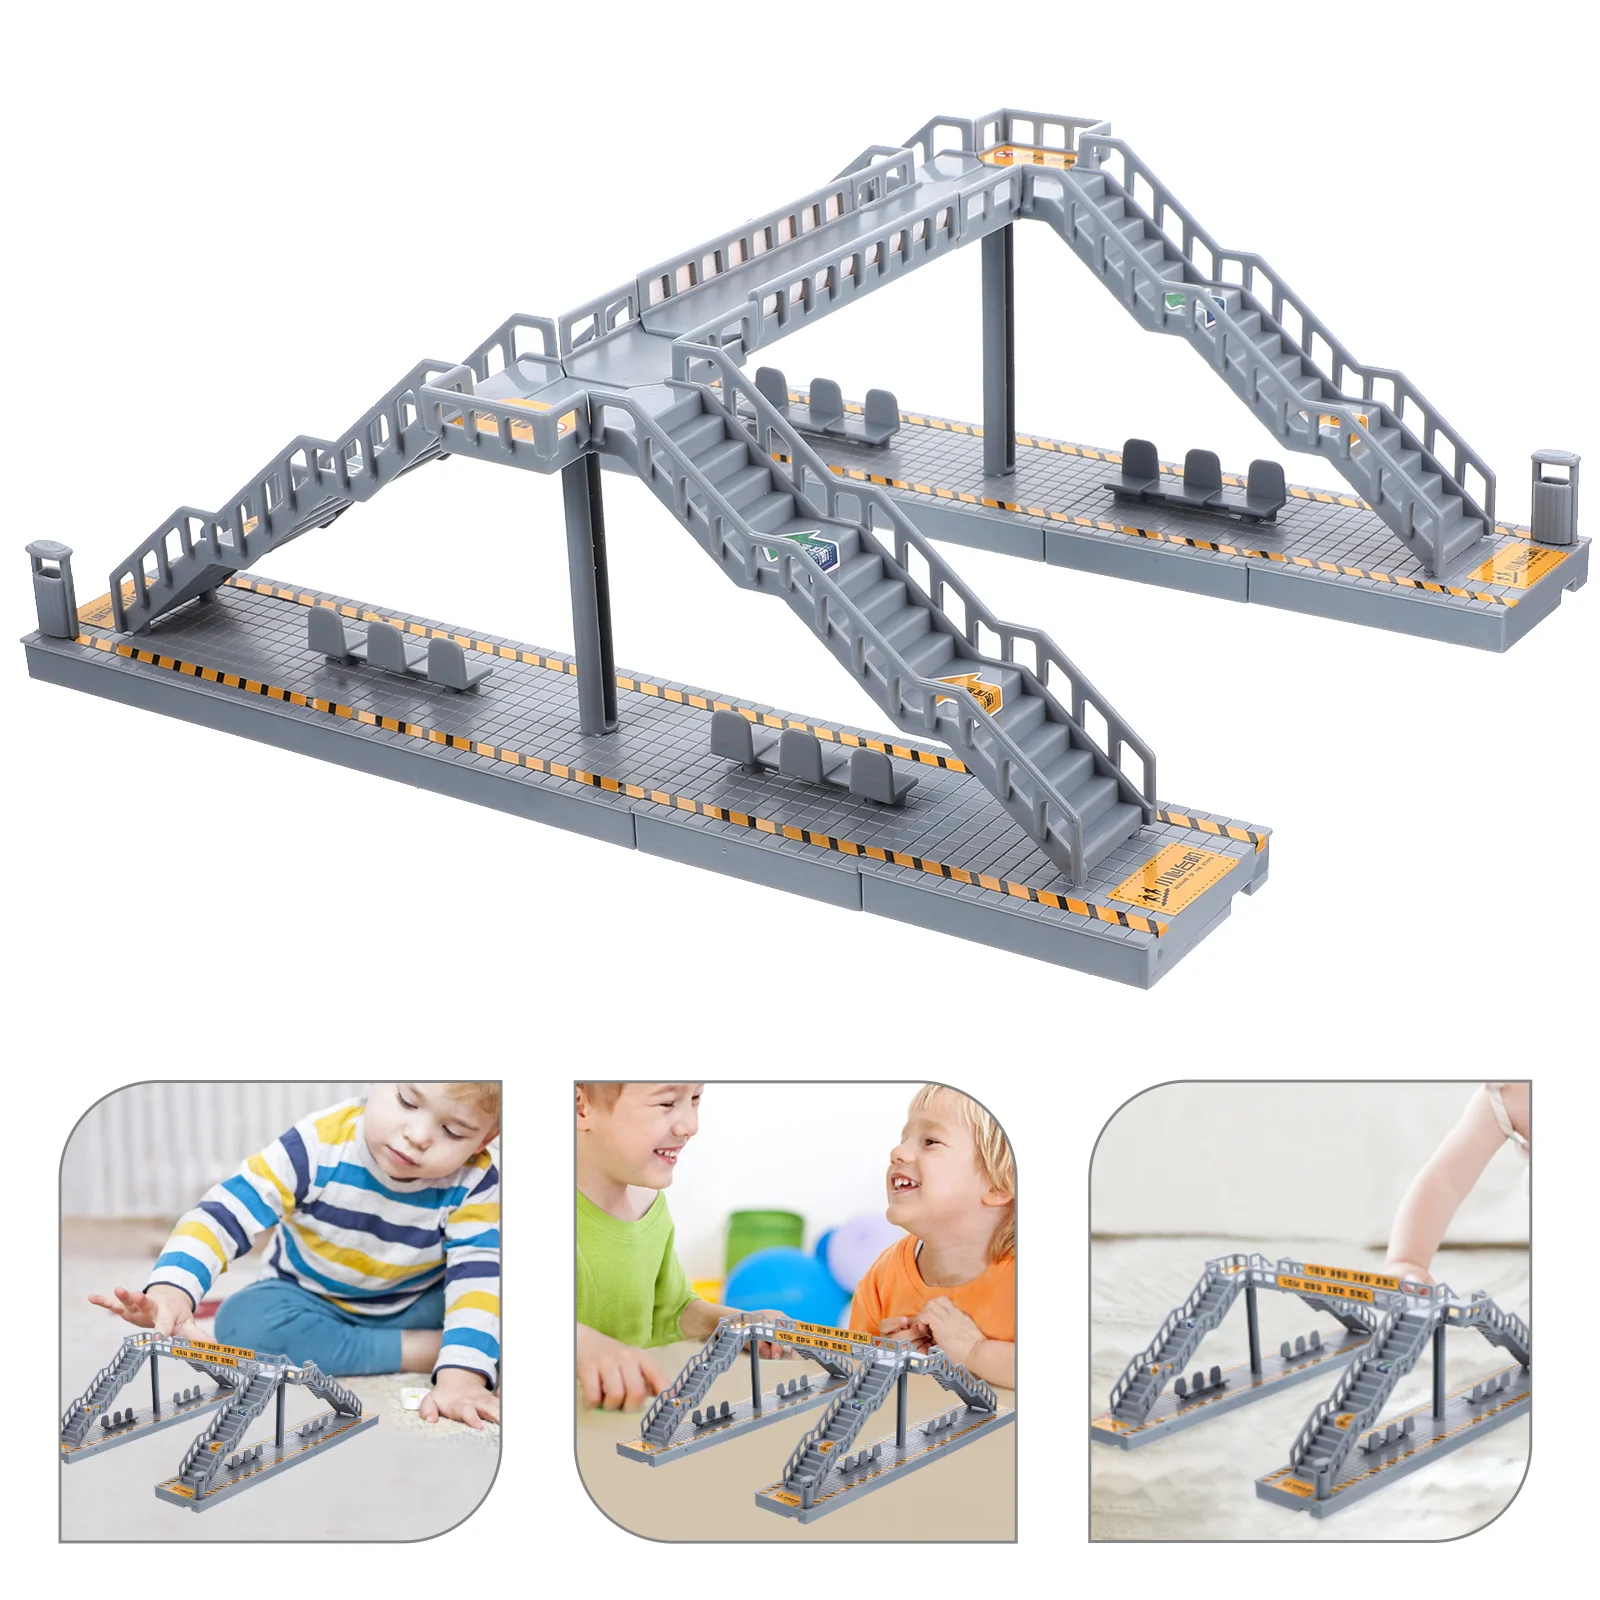 Pedestrian Bridge Puzzle Toy Plastic Footbridge Model Building Blocks Flyover Street Assembly Model For Children kids assembly model plane toy glider airplane military early education collect planes developmental toys children boys gift